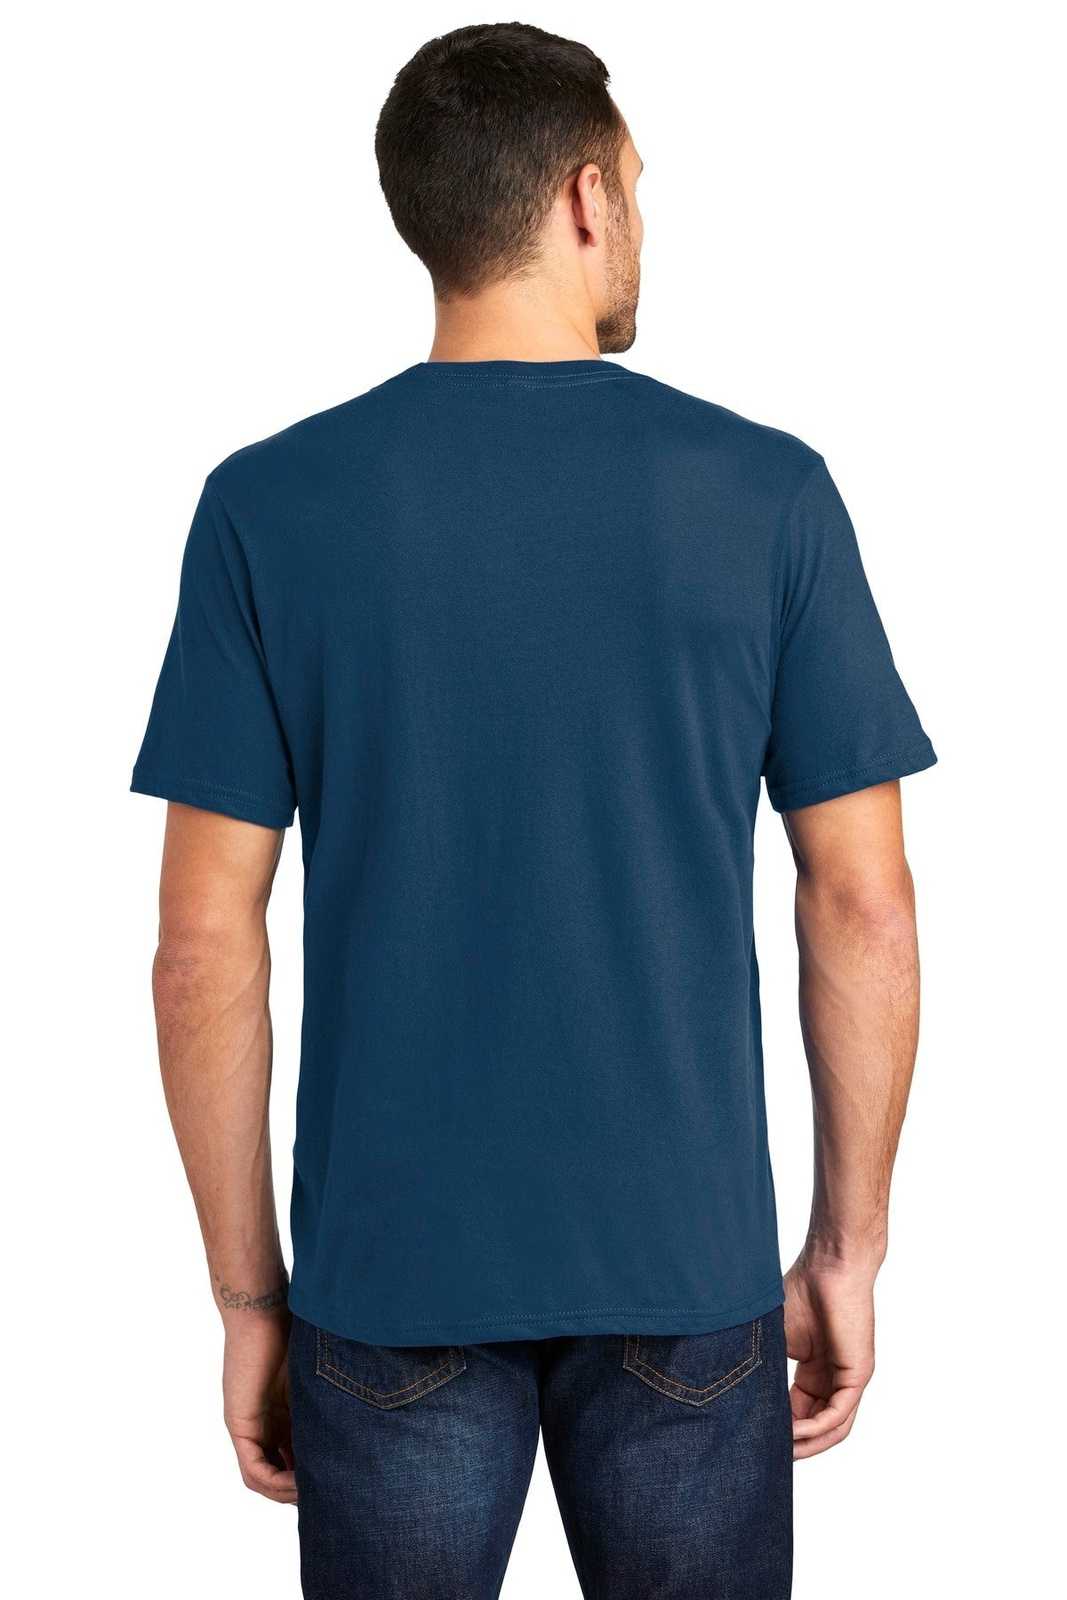 District DT6000 Very Important Tee - Neptune Blue - HIT a Double - 2